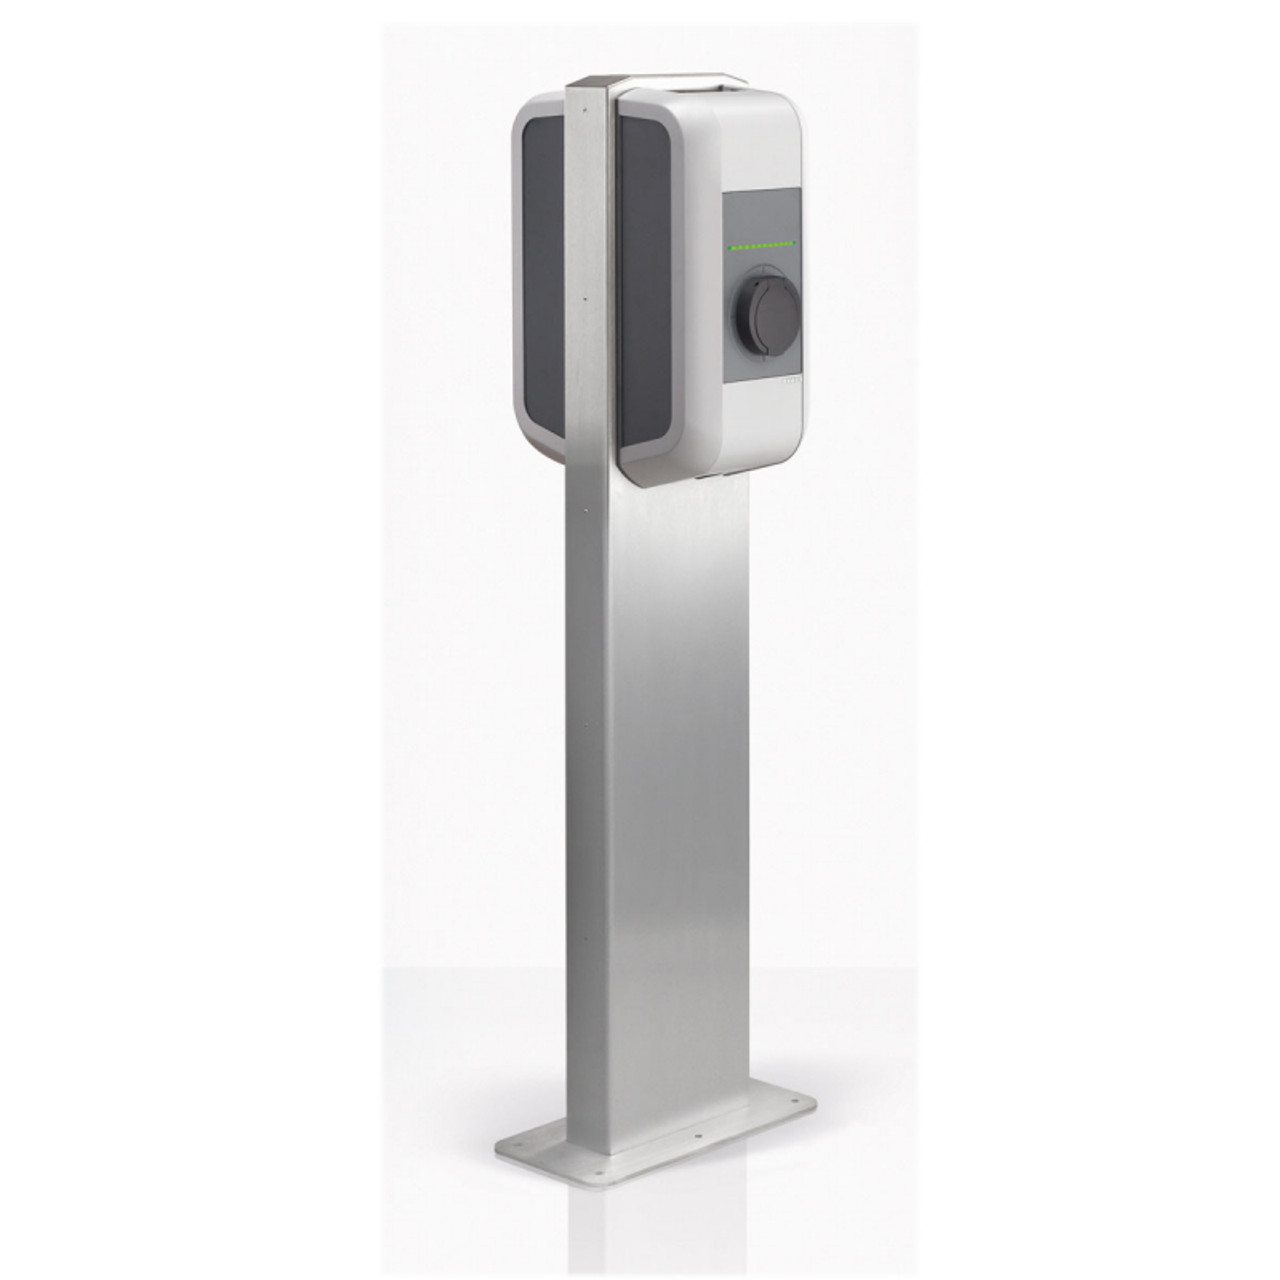 Pedestal for two wallboxes - stainless steel / 90,786